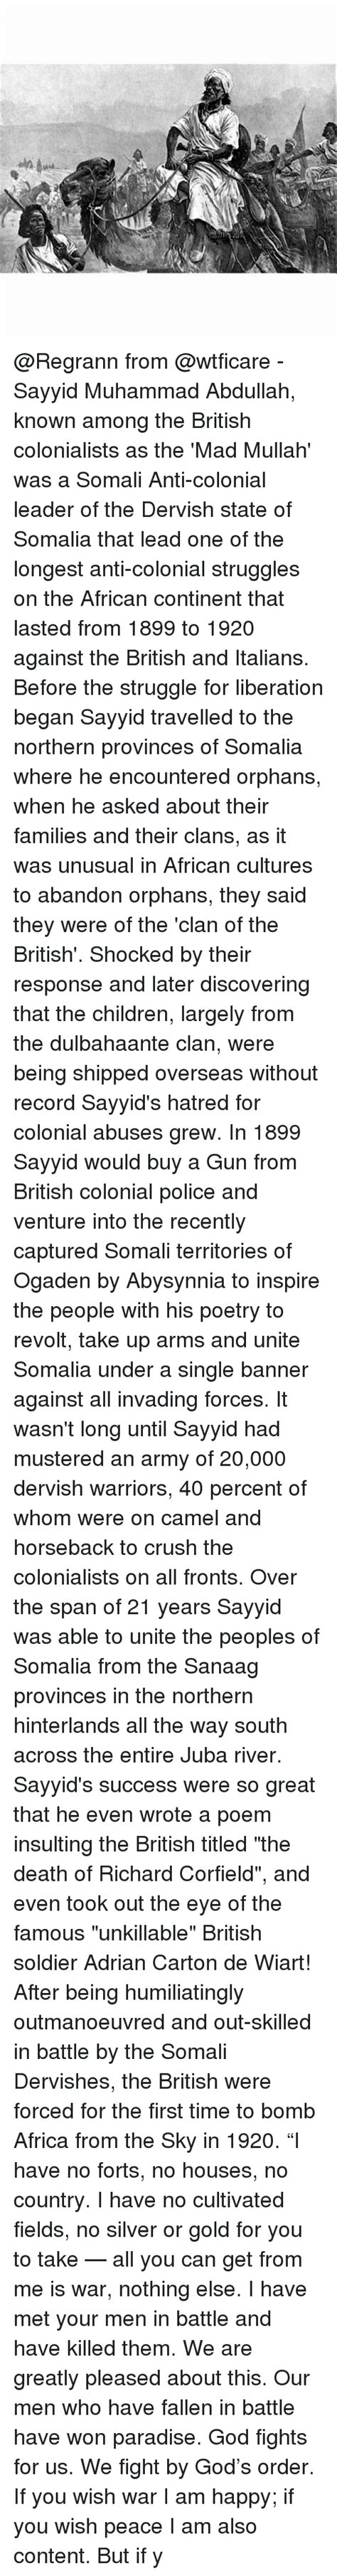 fn from sayyid muhammad abdullah known among the british colonialists